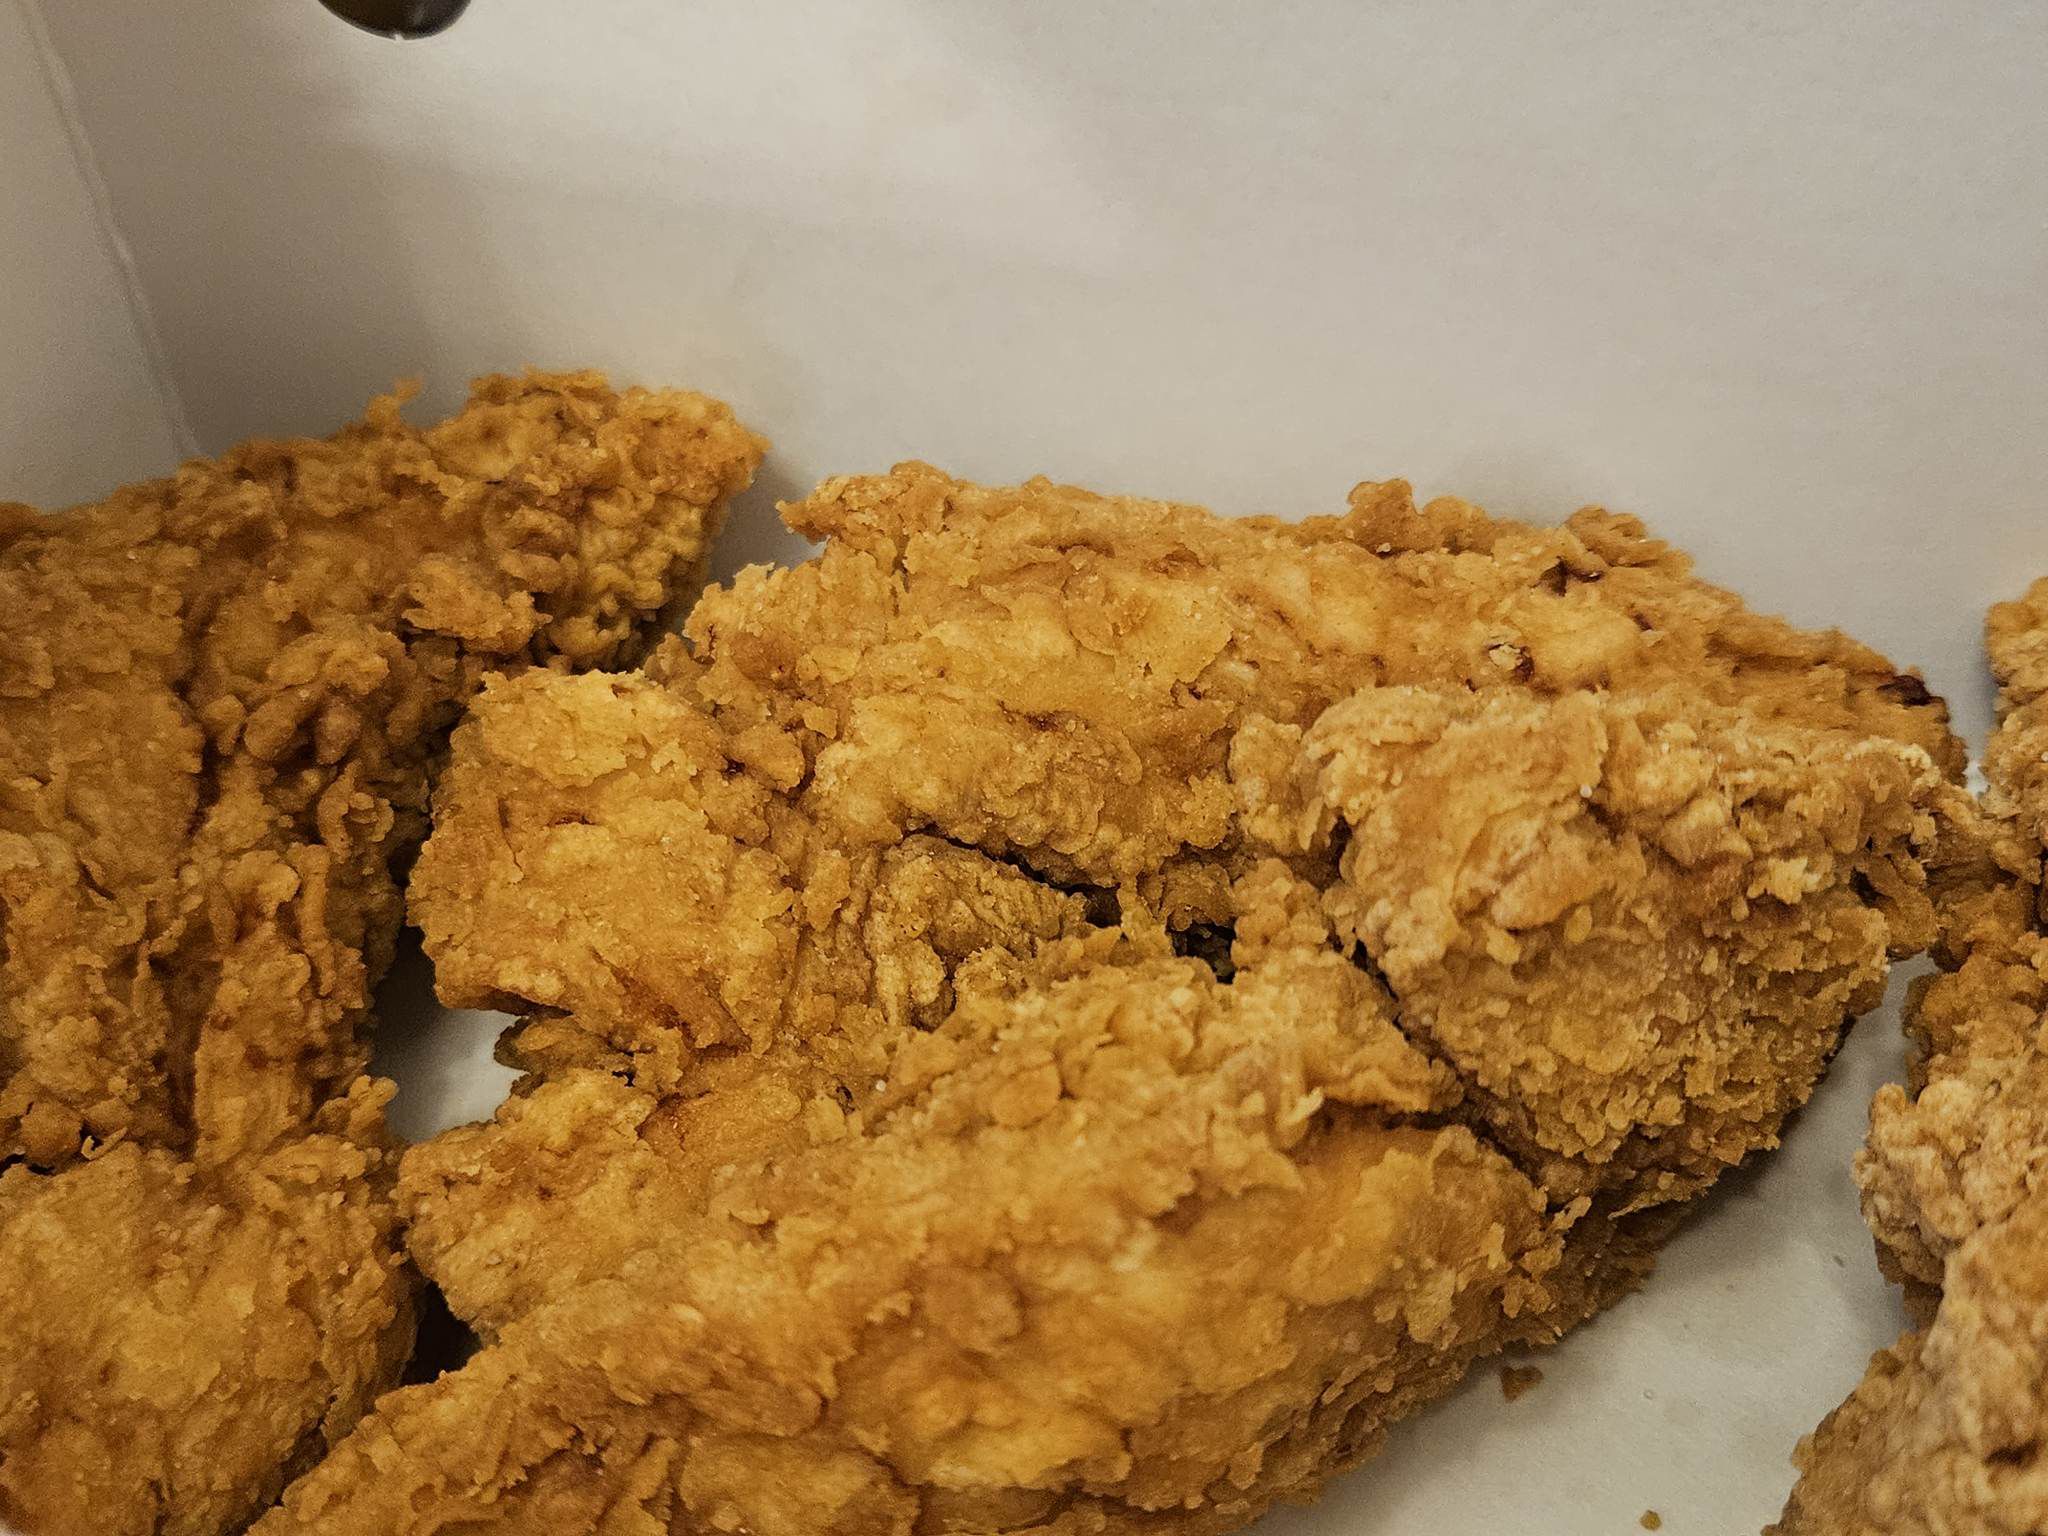 White Fence Farm’s flavor is unique to the venue, quite unlike other fried chicken. You have to taste it to know what I mean.